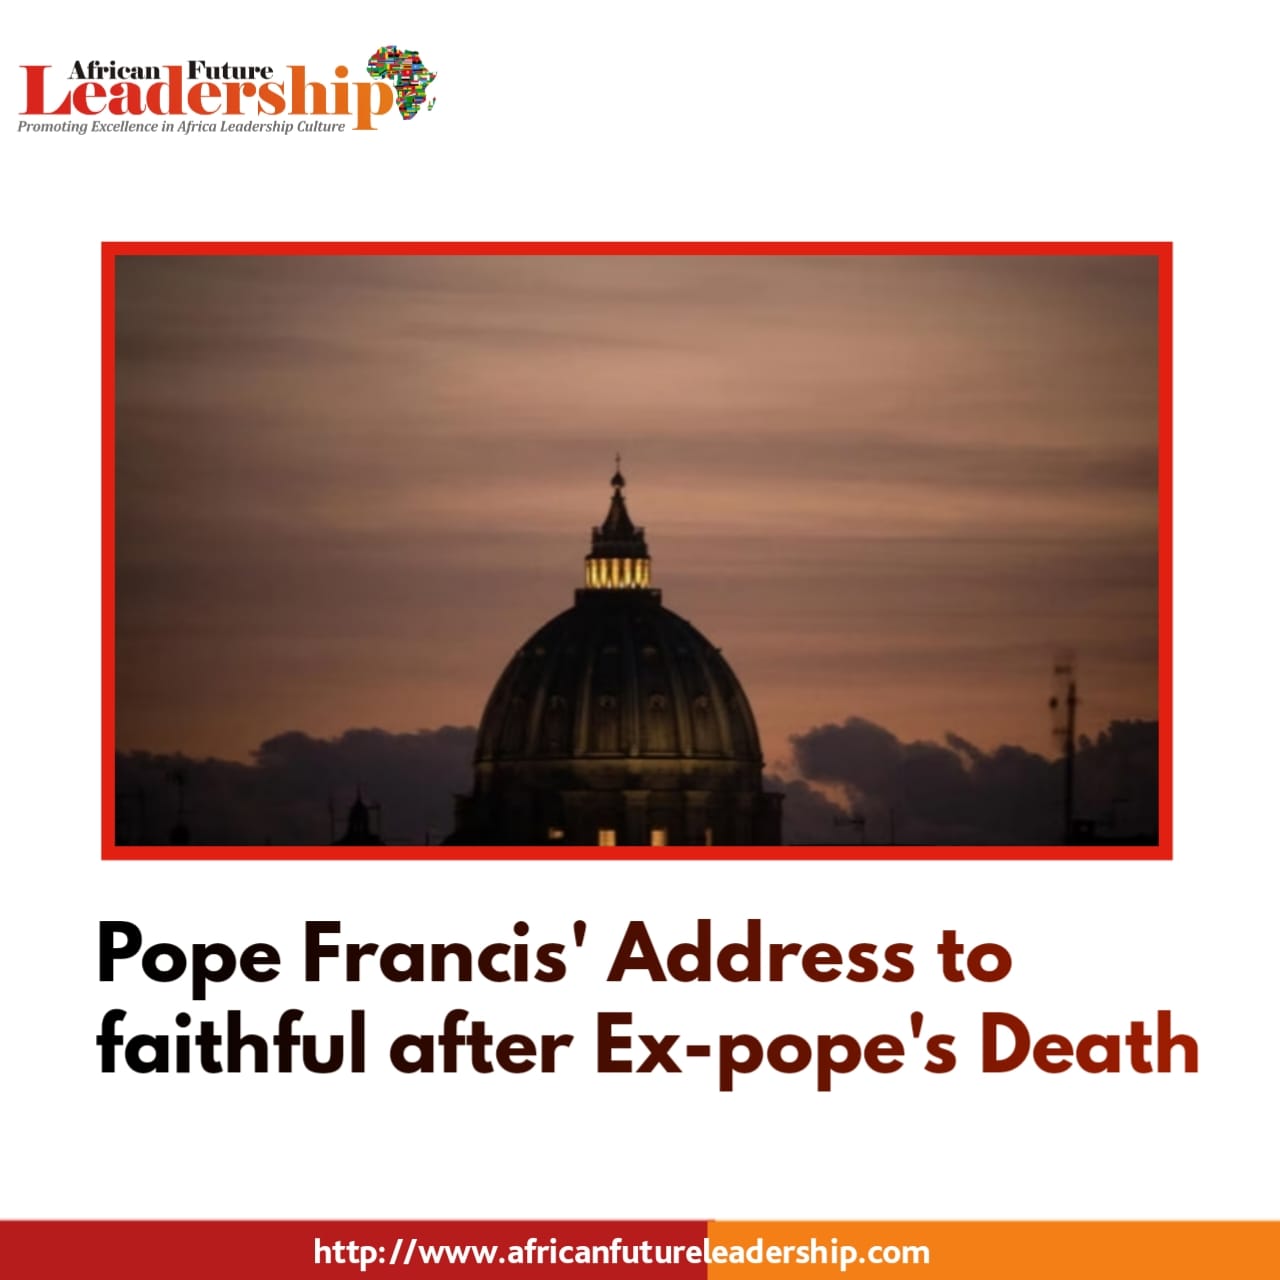 Pope Francis' Address to faithful after Ex-pope's Death